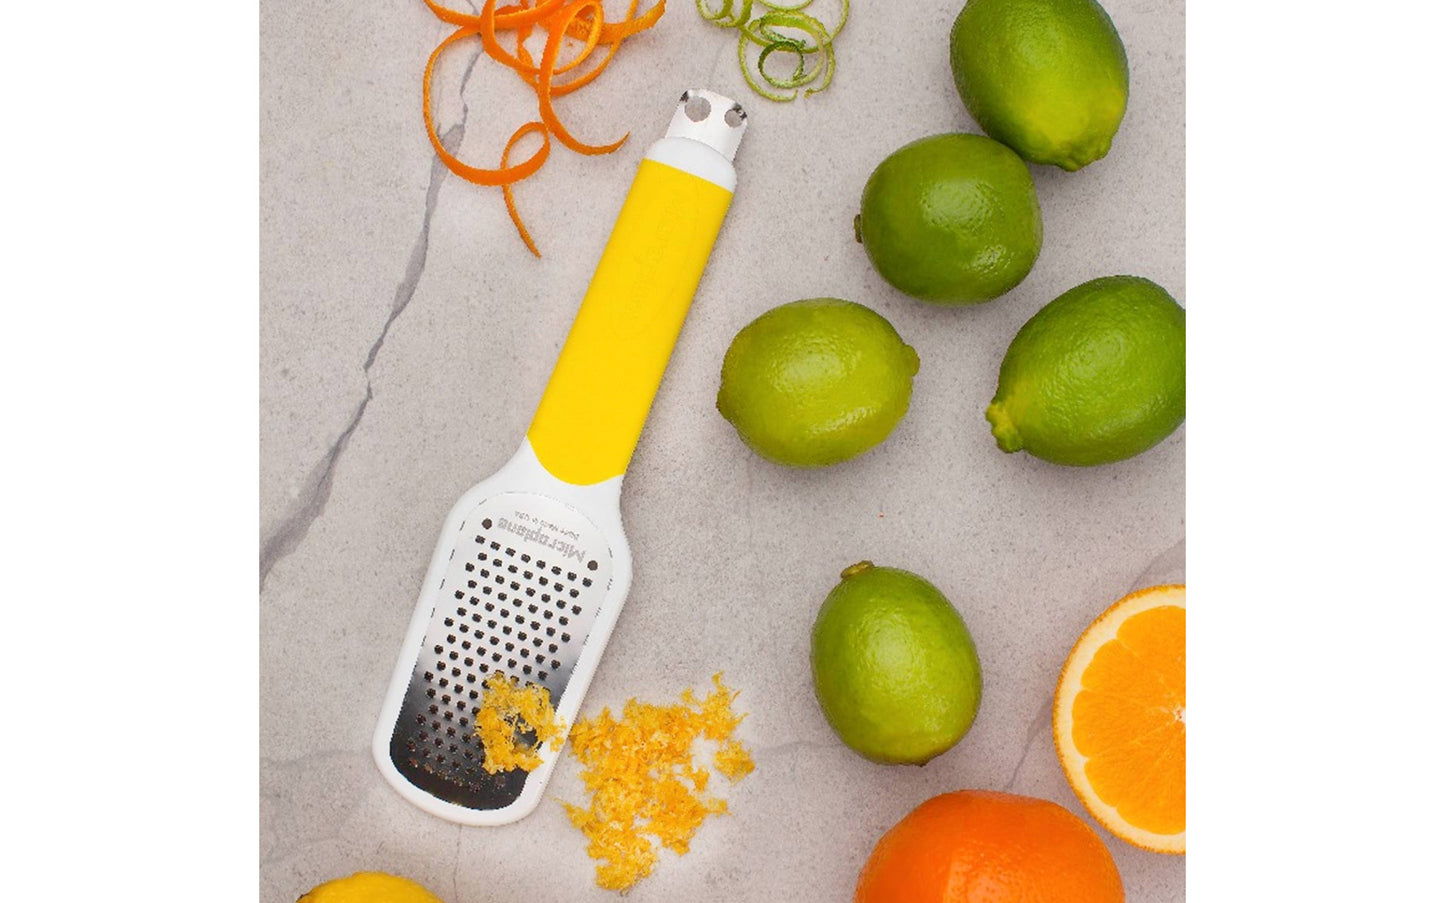 Made in USA - Blade made in USA - 3-in-1 Cirtus Tool: Zest, Garnish, & Score - Non-slip grip - Dishwasher safe - Razor-sharp blades made from stainless steel - Great for zesting oranges, lemons, limes & other types of citrus fruits -  three-in-one Ultimate Citrus Tool from Microplane - Multi-Zester Tool - 098399475202